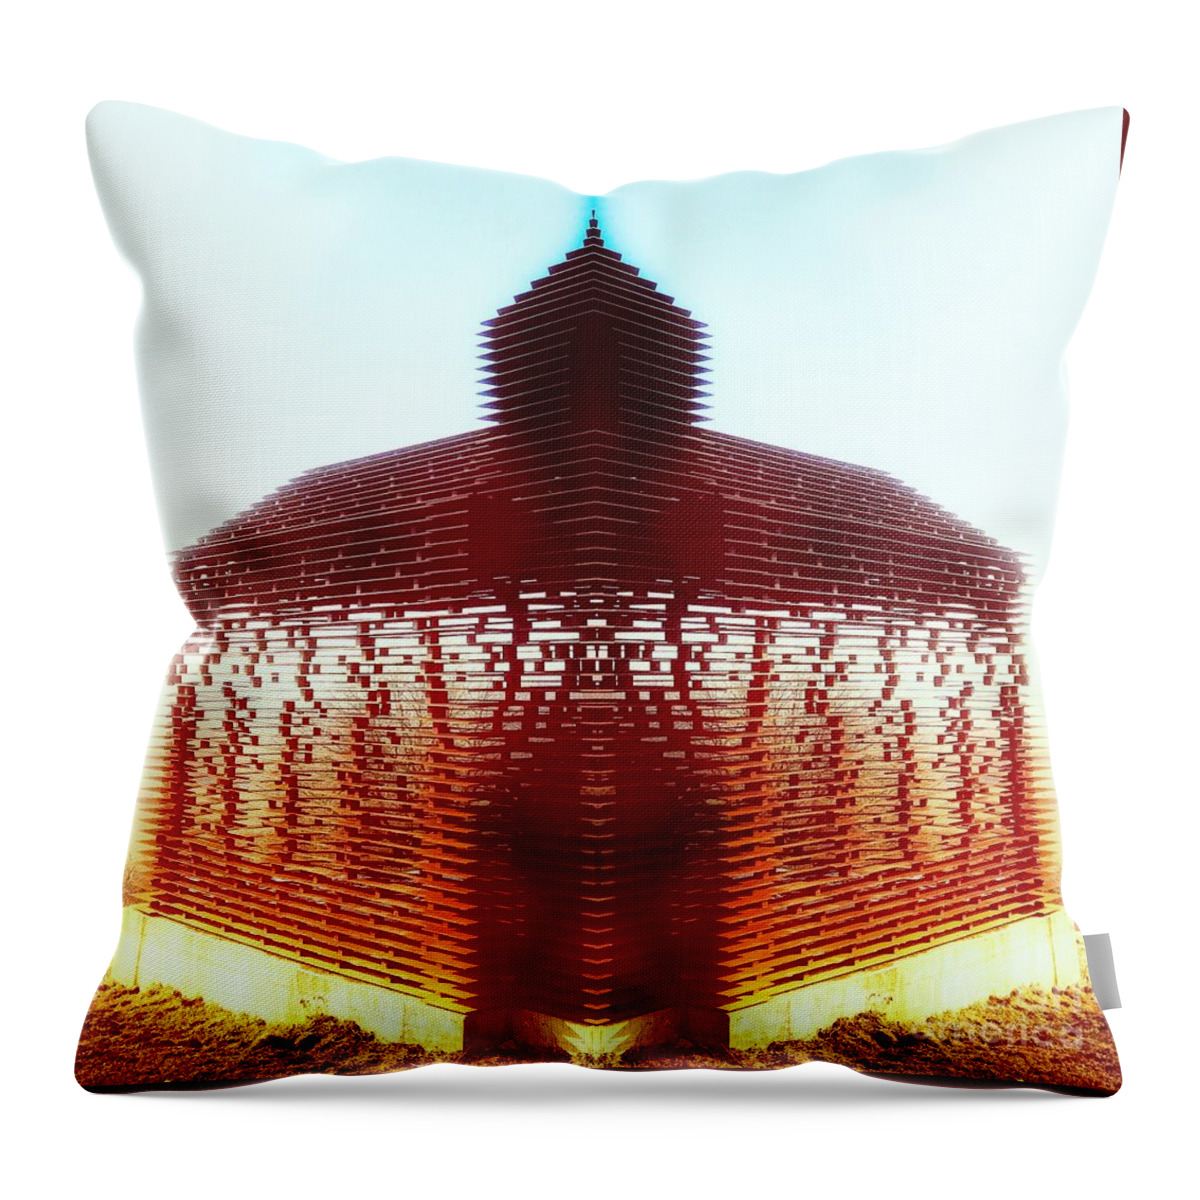 Lines Throw Pillow featuring the photograph Lignes by HELGE Art Gallery